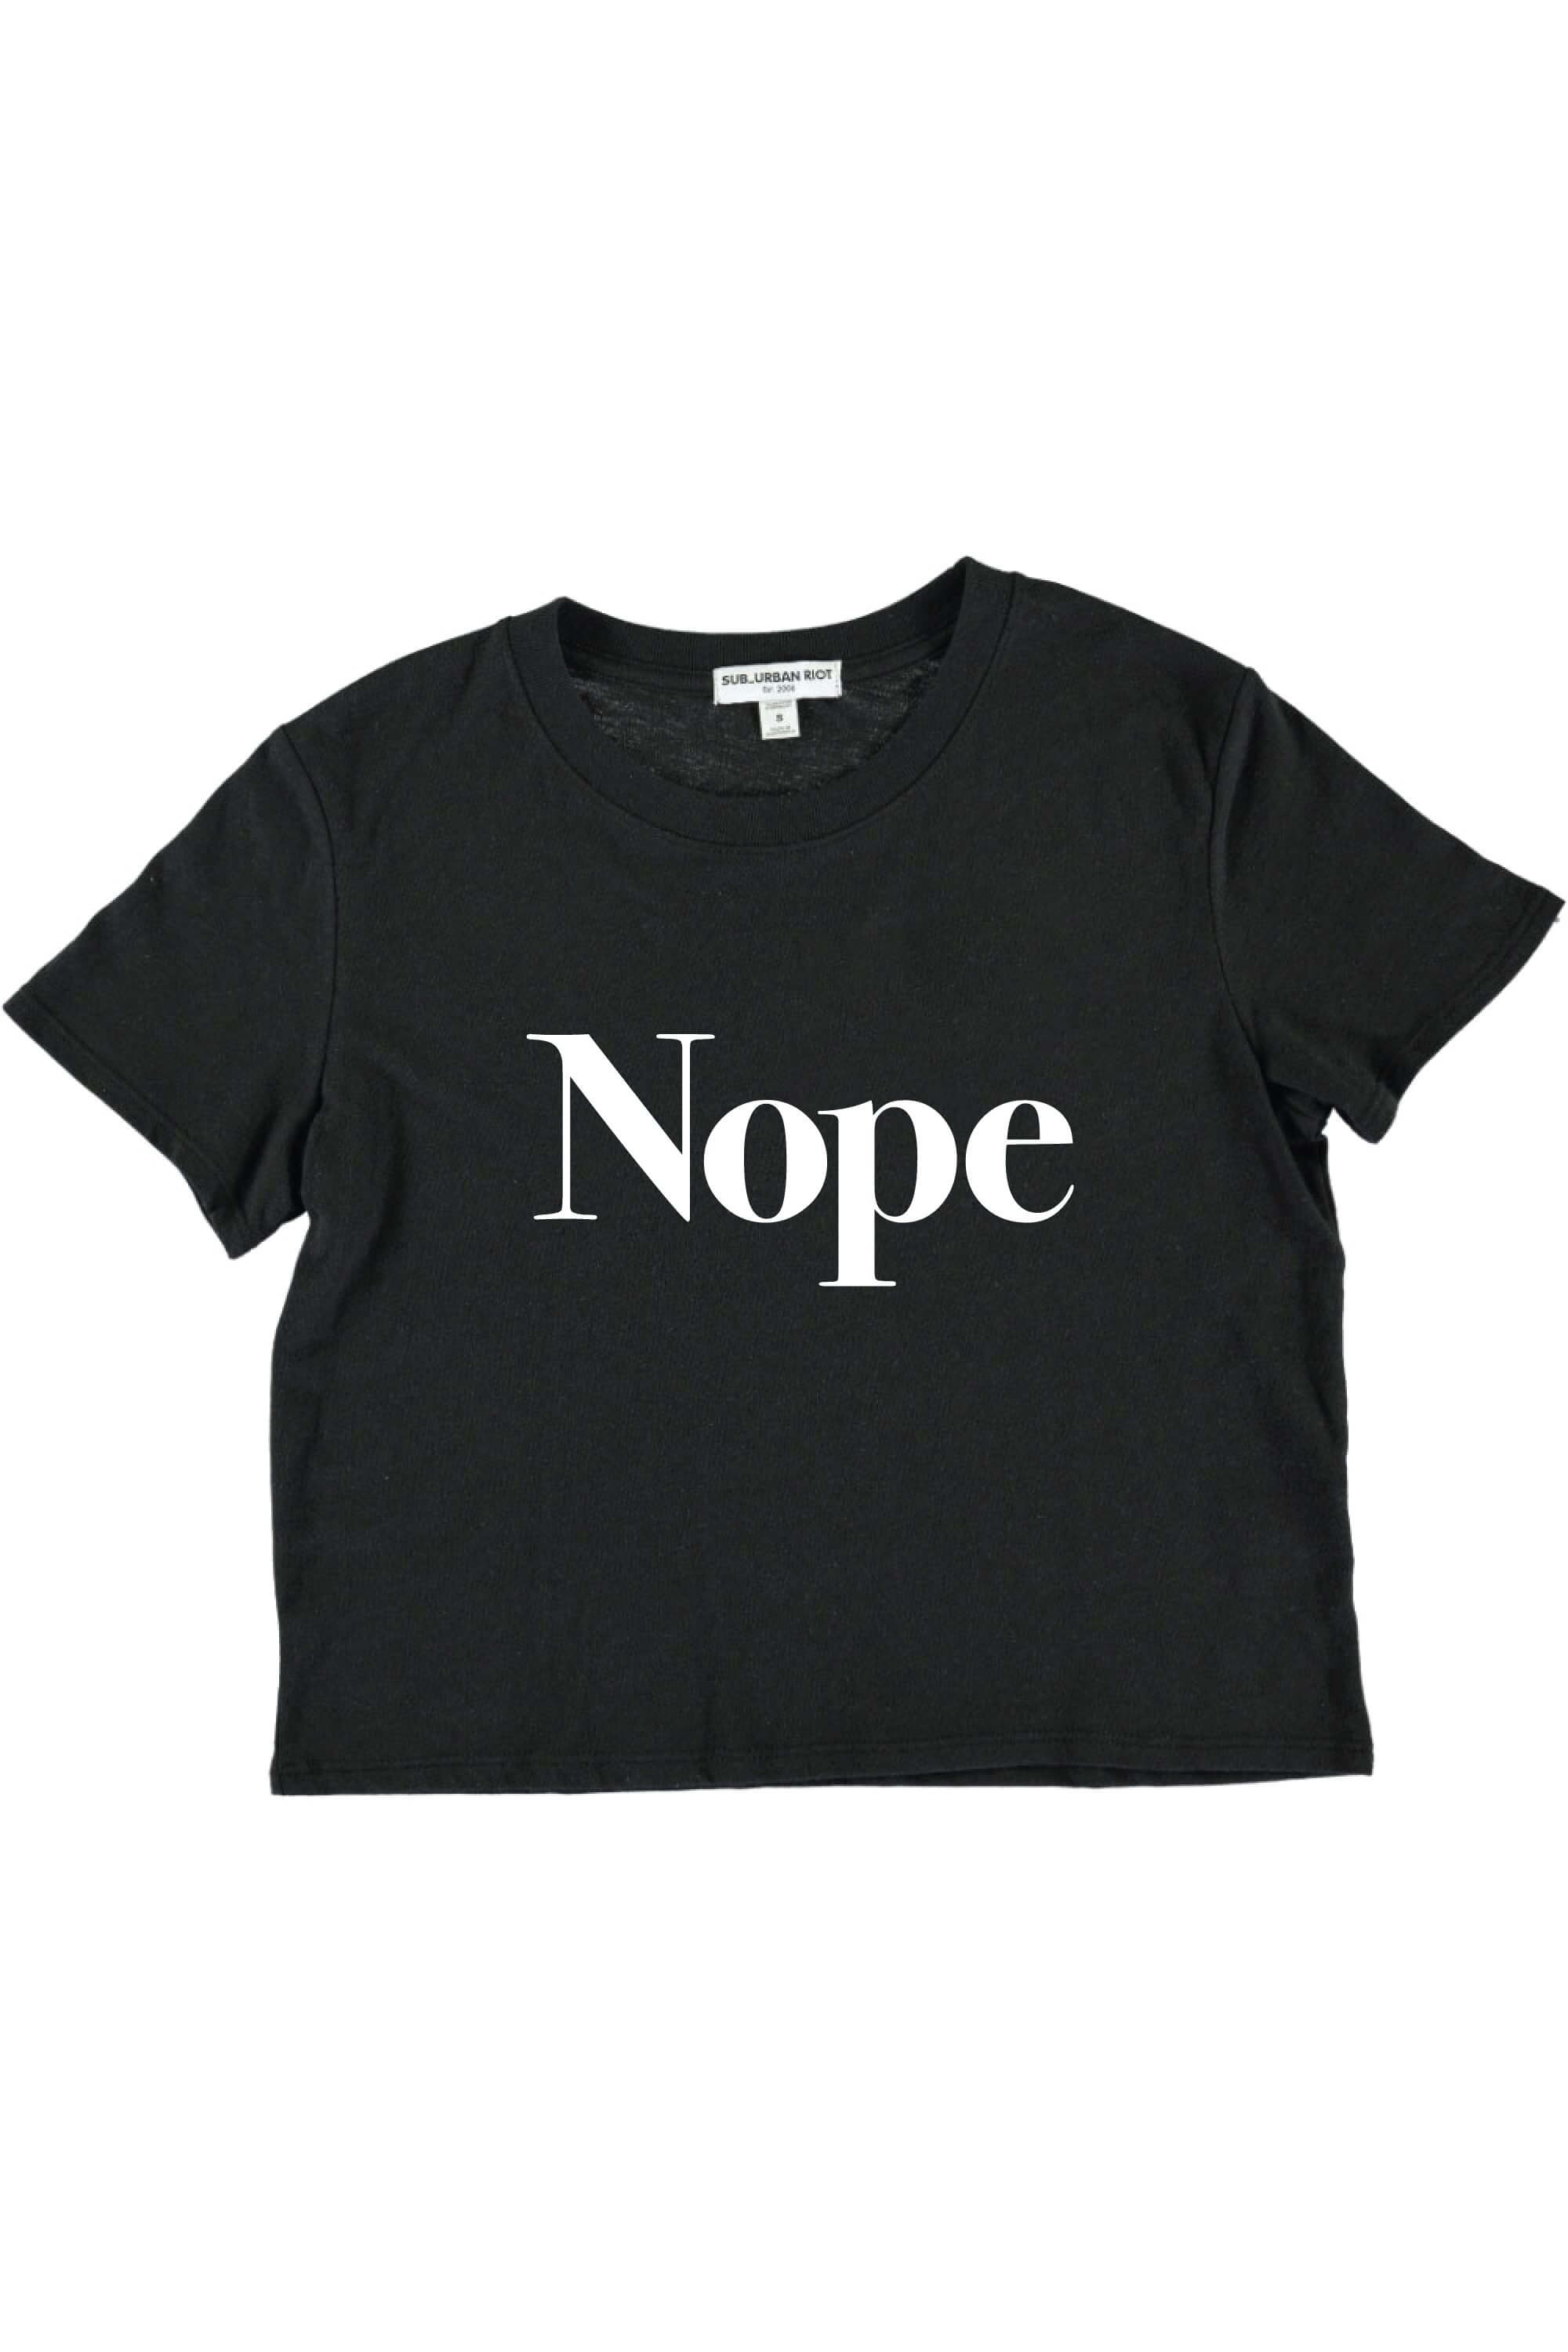 NOPE YOUTH SIZE CROP TEE